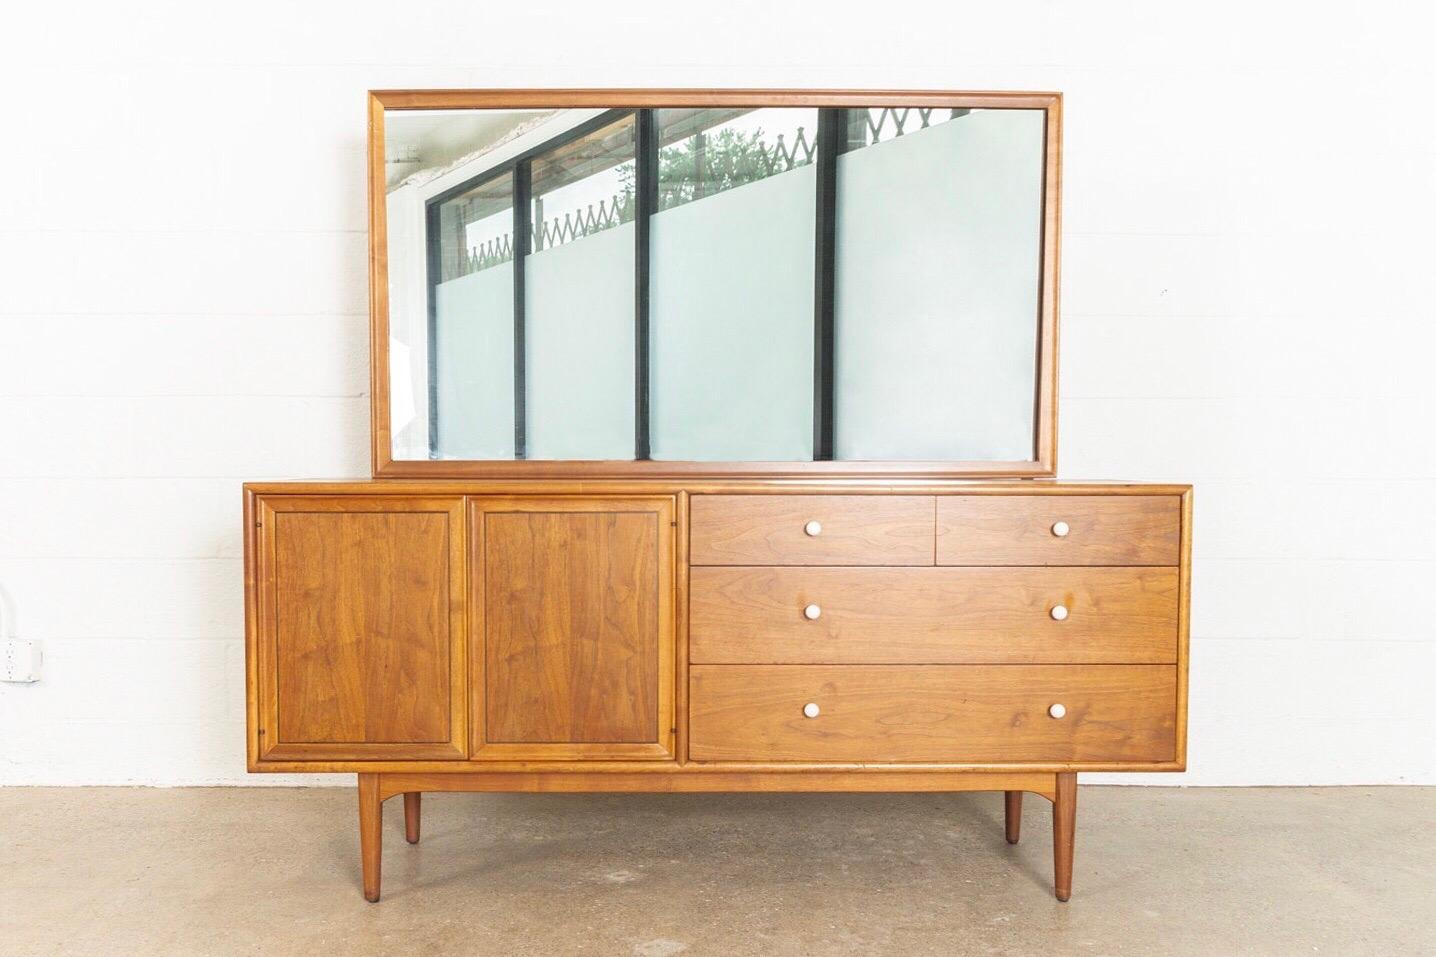 • Iconic Drexel declaration lowboy dresser with mirror designed by Kipp Stewart and Stewart McDougall, circa 1950.
• Sleek, elegant Mid-Century Modern styling.
• Impeccably crafted from walnut with beautiful natural grain.
• Original signature